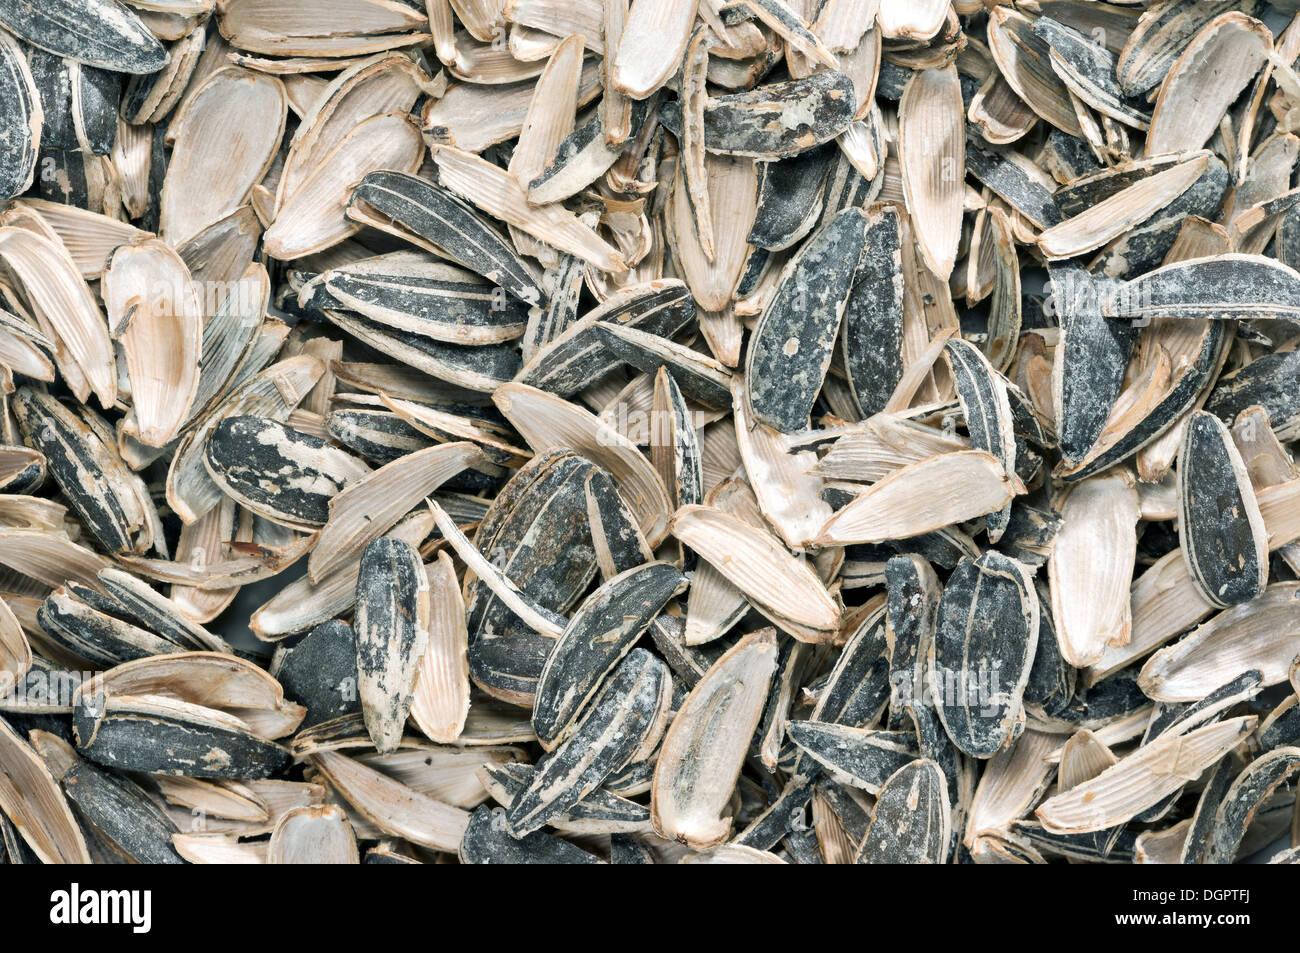 sunflower seeds with shell scours Stock Photo